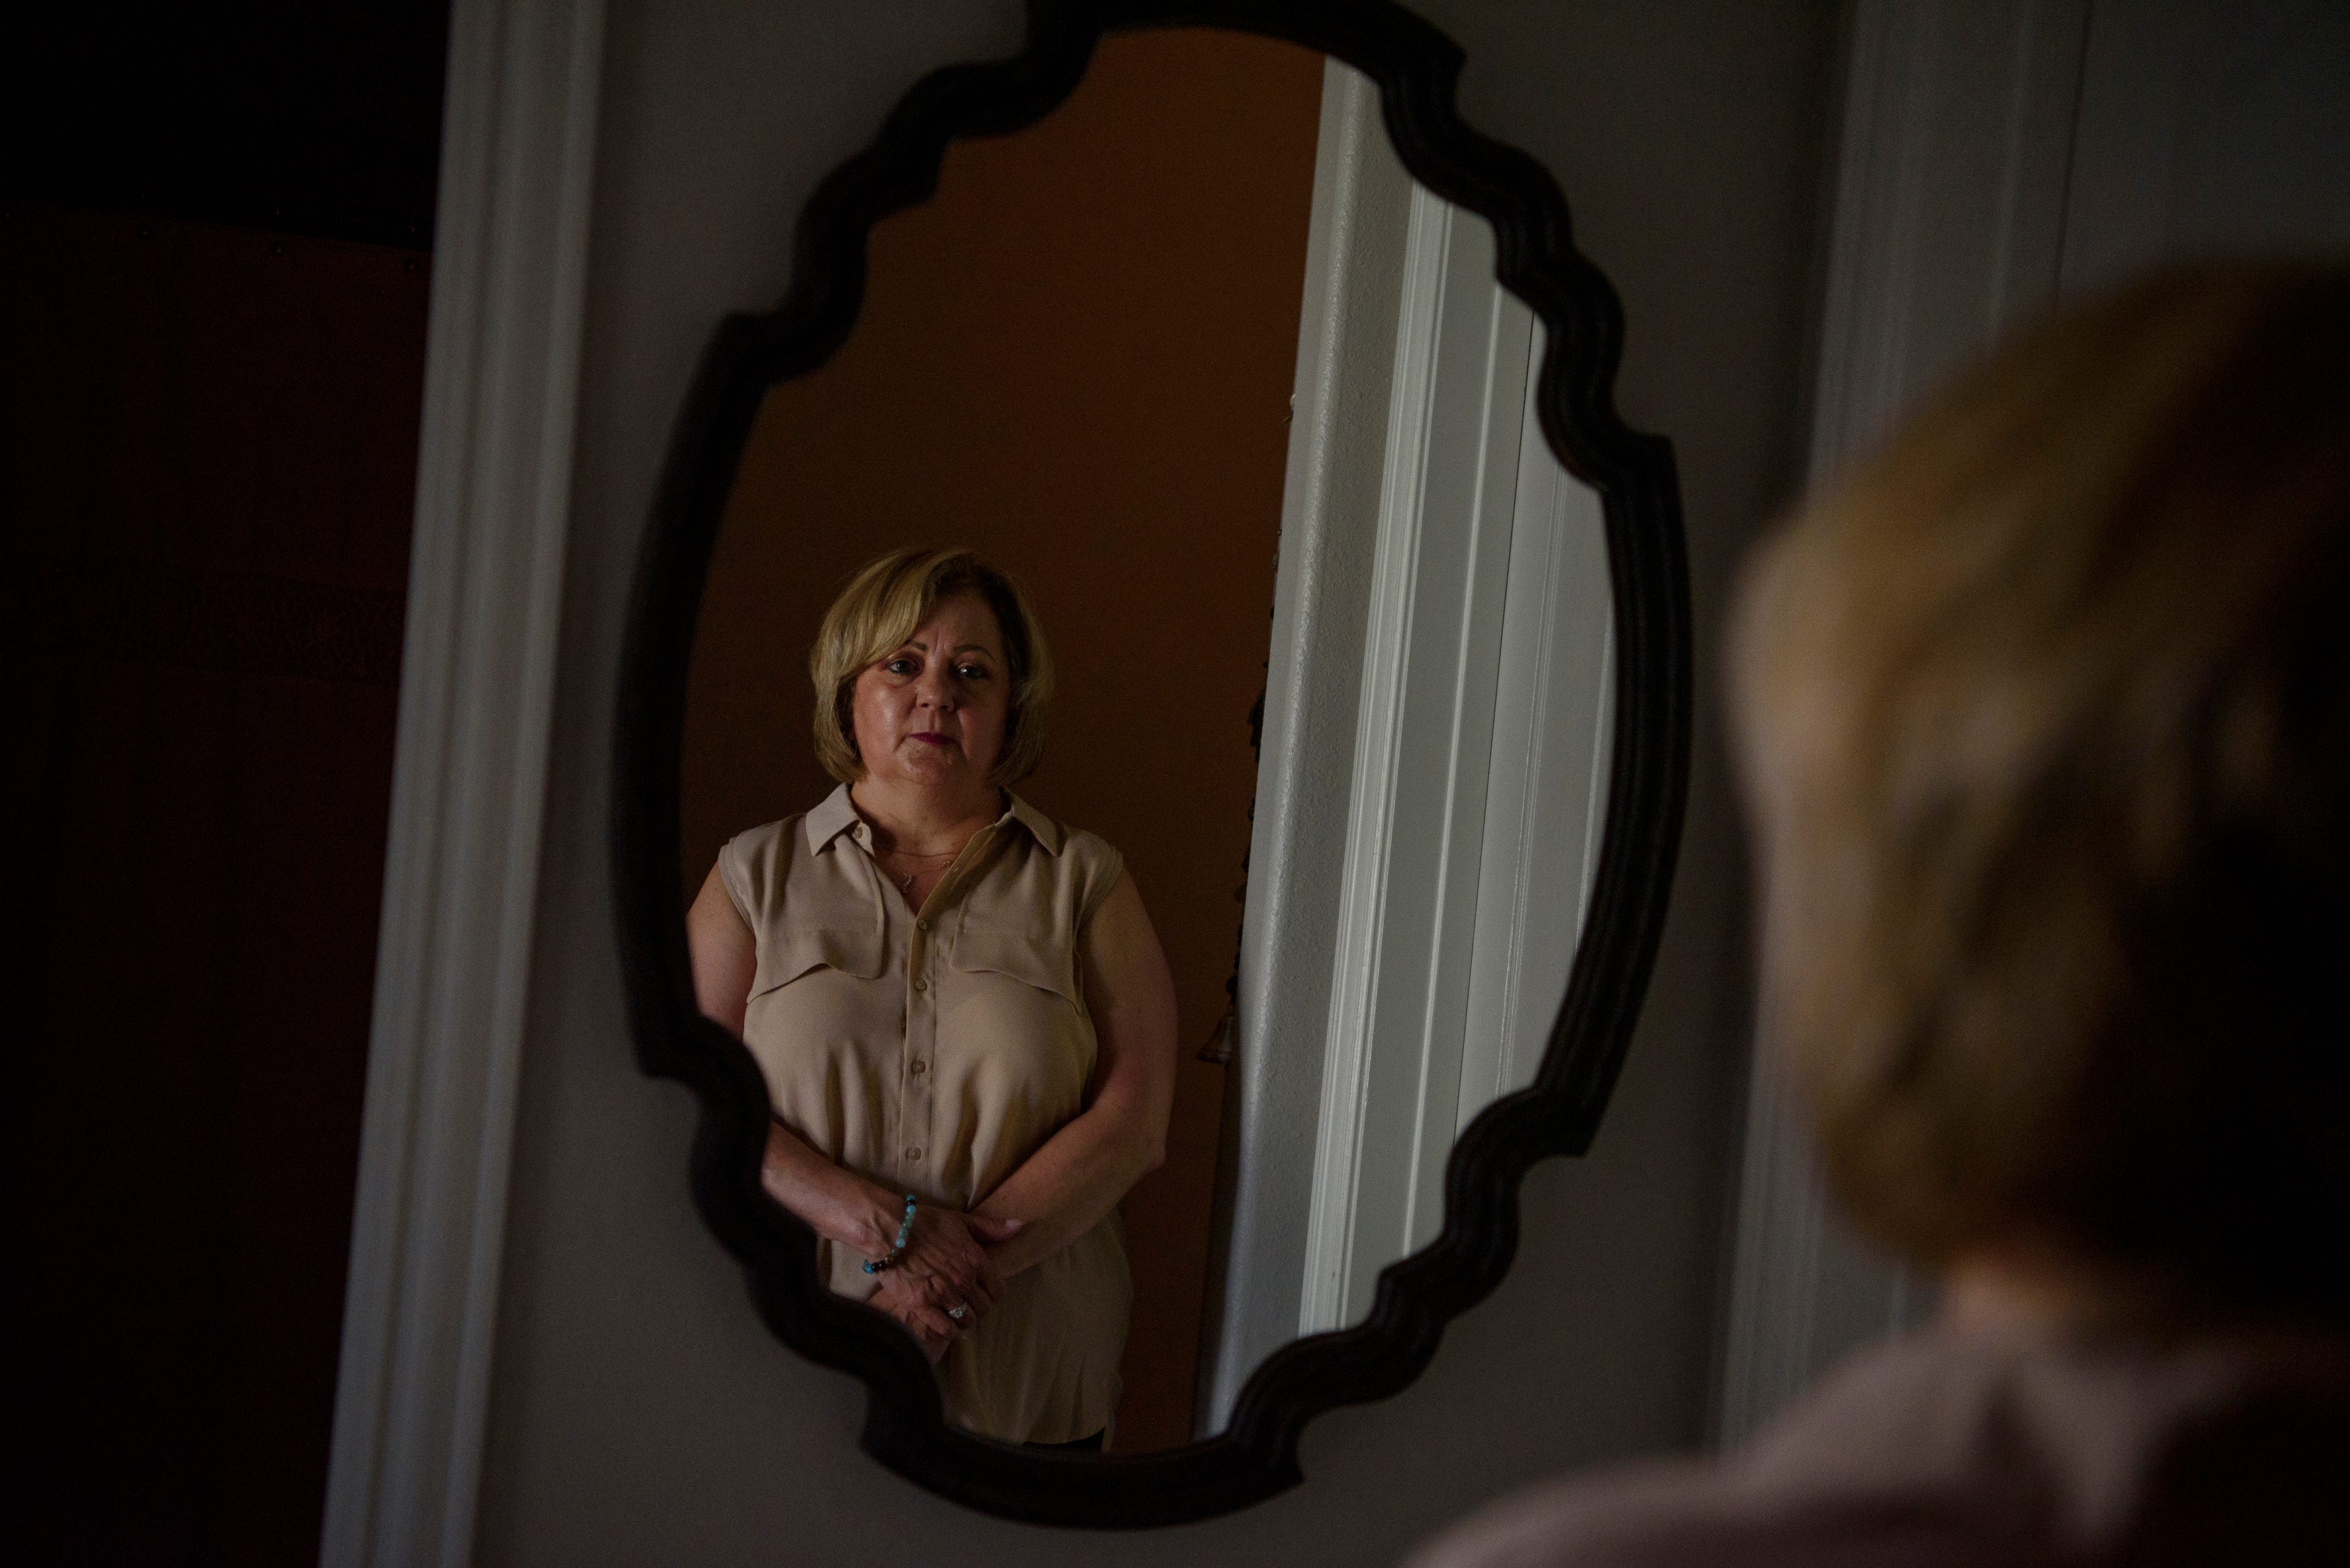 Melissa Mills, daughter of Norma McCorvey, poses for a portrait at her home in Katy, Texas, on April 22, 2022. McCorvey was the plaintiff in the historic Roe v. Wade legal case, making it unconstitutional for state laws to ban abortion. Mills is McCorvey's oldest child.